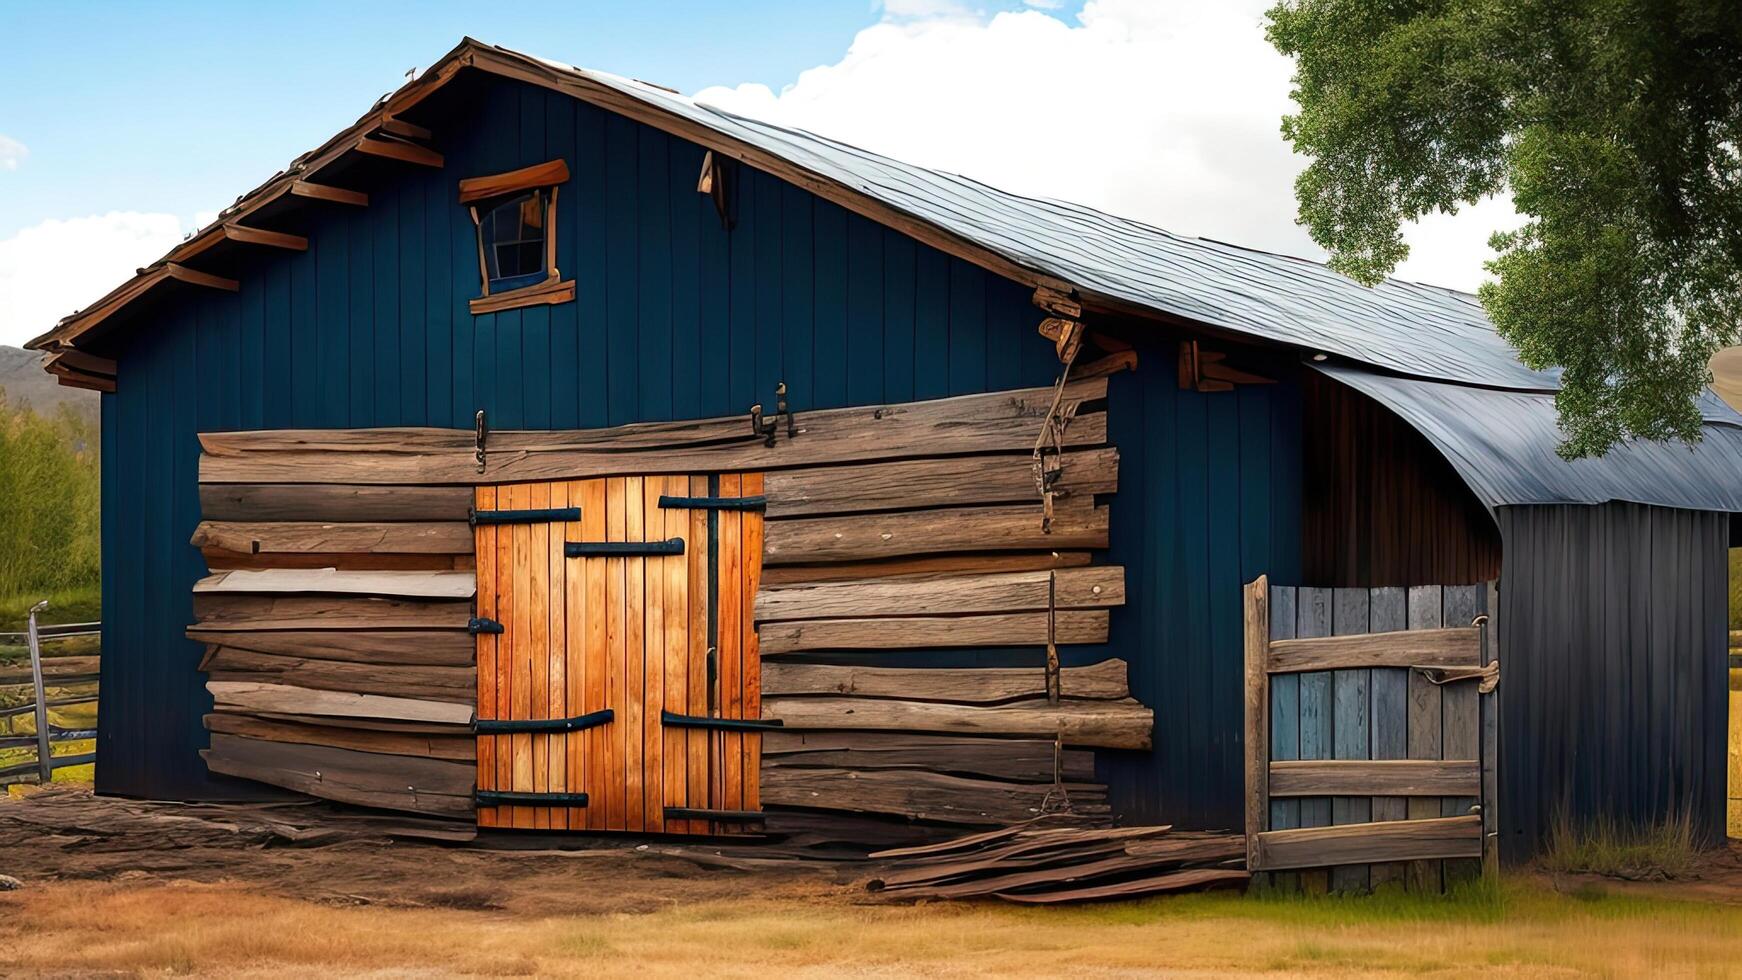 3d rendering of a blue barn with wooden door and barns. photo